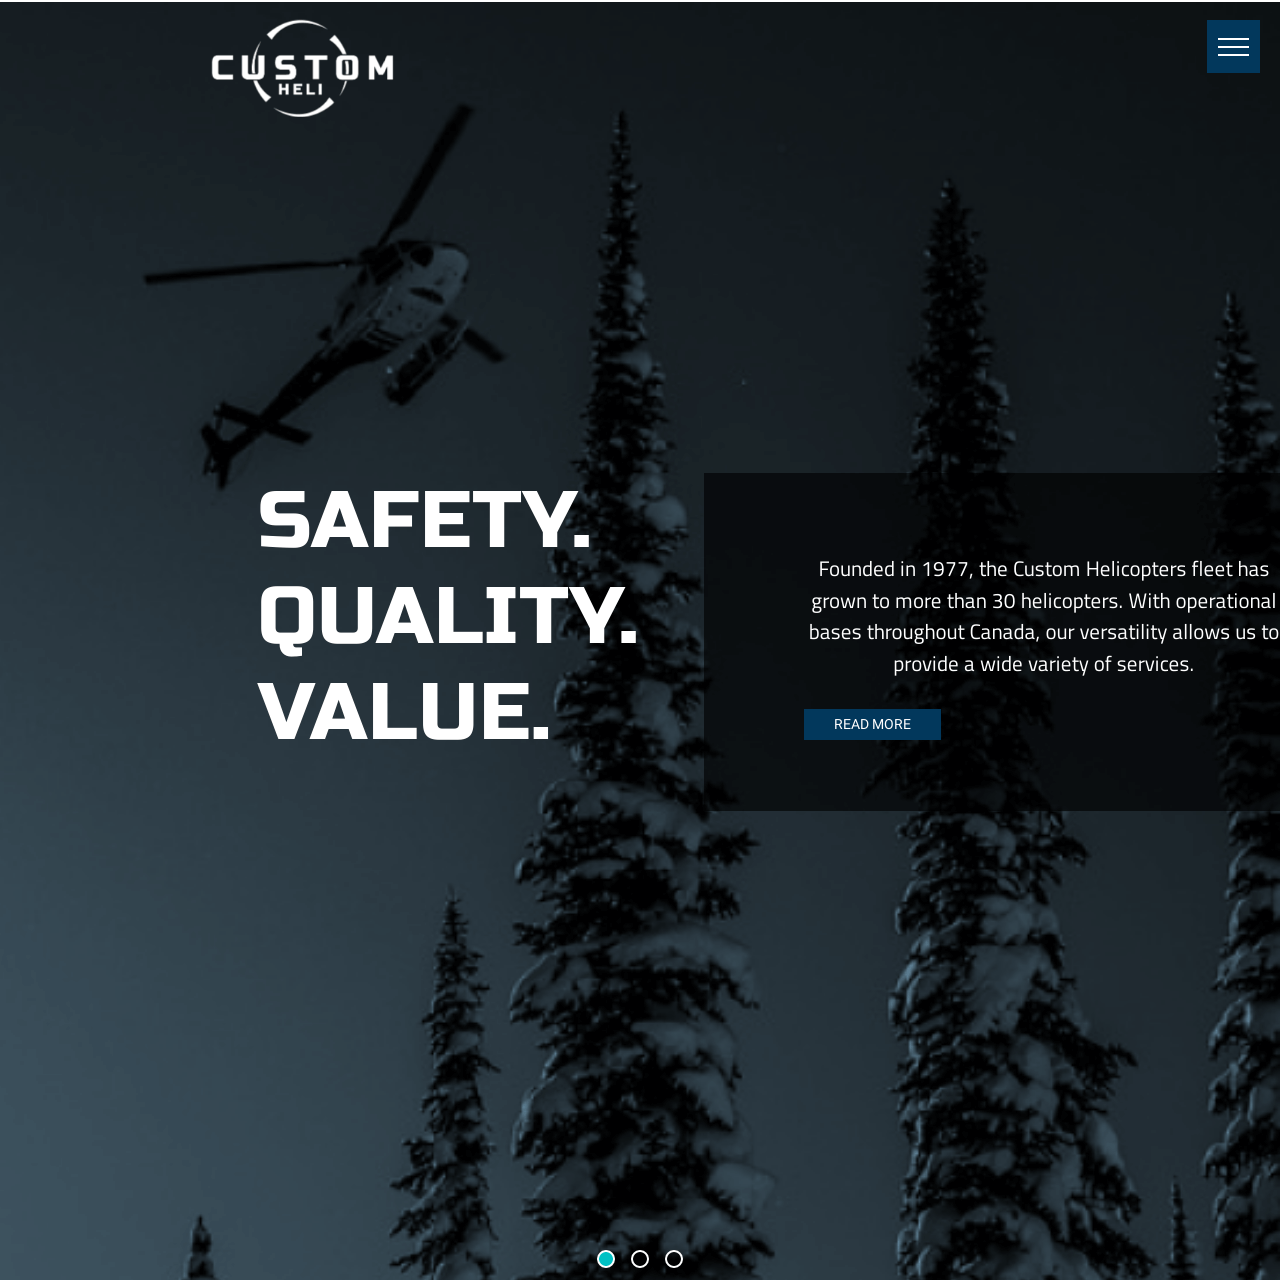 Custom Helicopters website designed by 6P Marketing